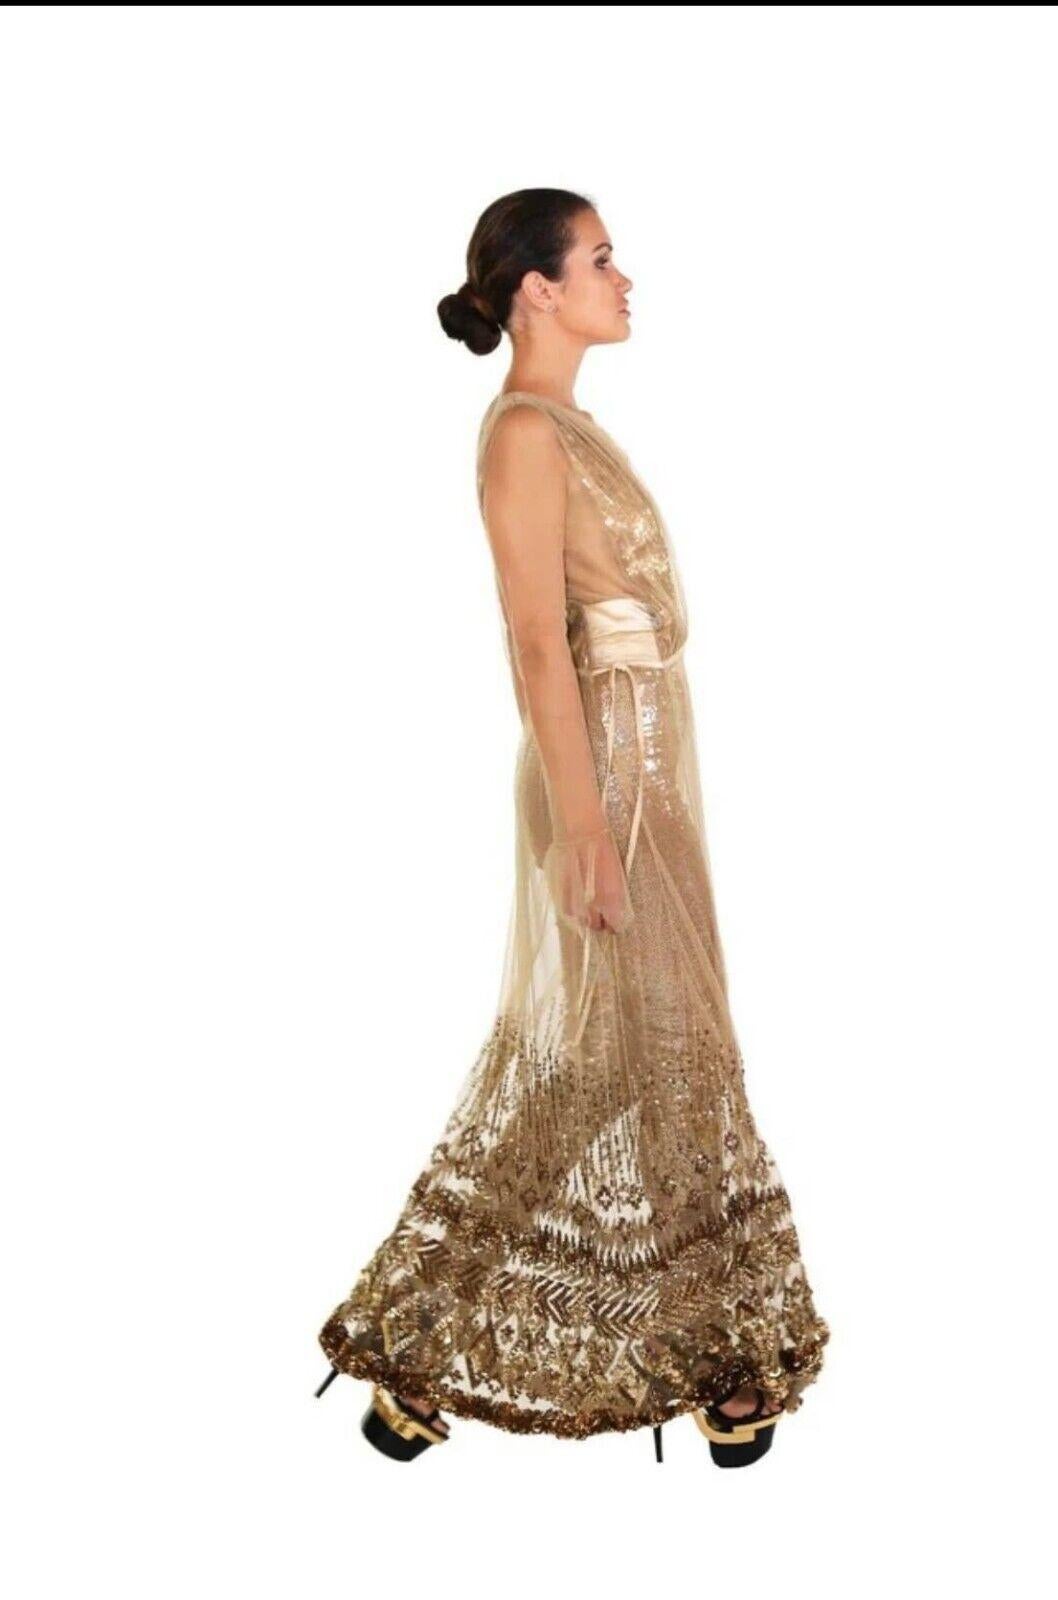 New Tom Ford Nude Embellished Chiffon Dress w/ Gold Sequin Pants 38 - 2 For Sale 2